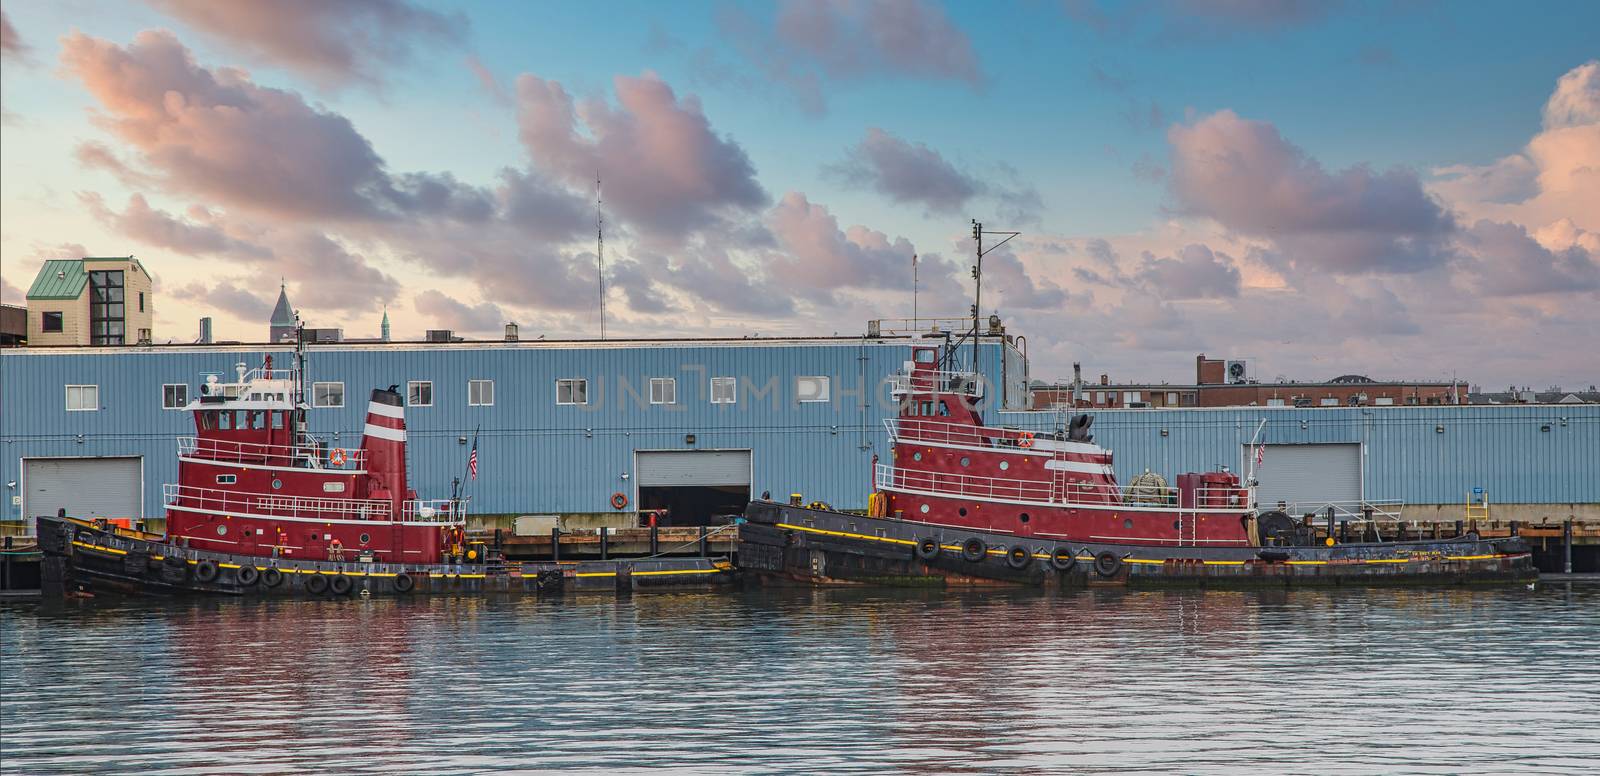 Two Red Tugboats in Harbor at Dusk by dbvirago